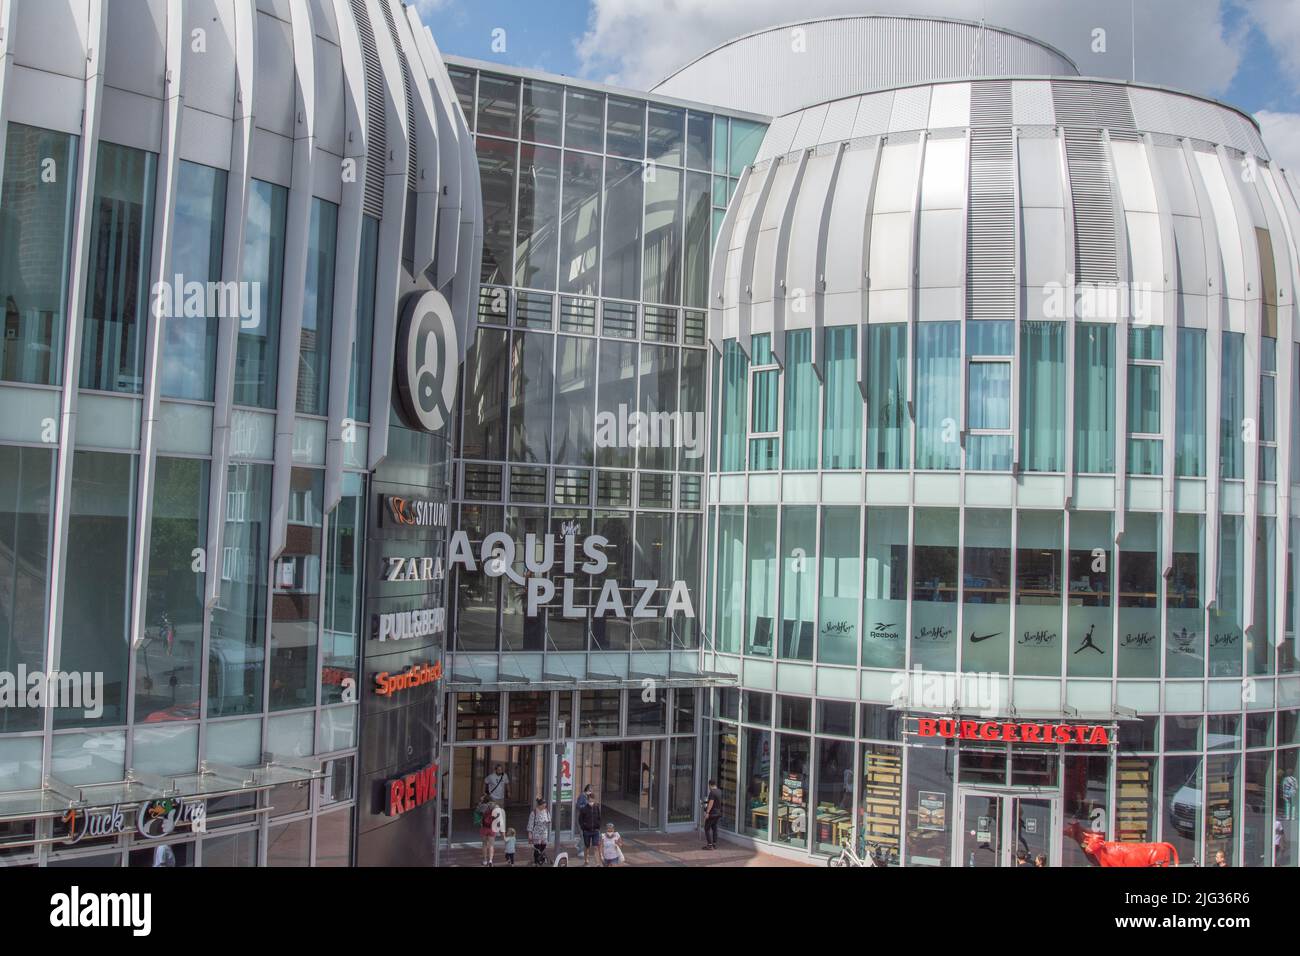 Aachen july 2022: The Aquis Plaza is a shopping center in Aachen city center at the eastern end of the Adalbertstrasse shopping street. Stock Photo